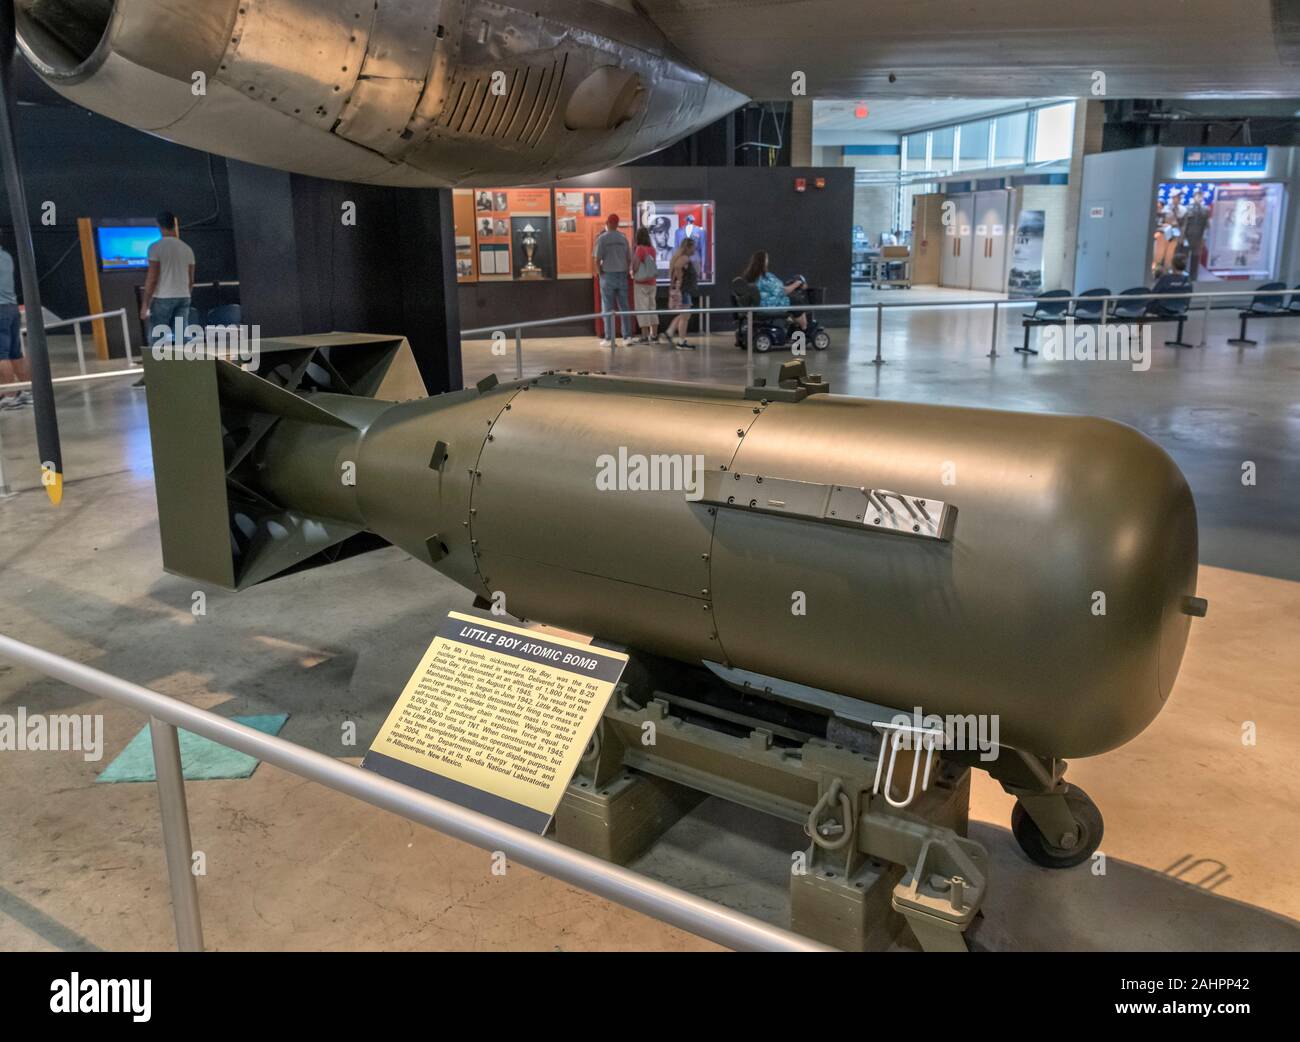 A demilitarised Mark I Little Boy atomic bomb, the bomb which was dropped on Hiroshima during WWII, National Museum of the United States Air Force, Dayton, Ohio, USA. Stock Photo